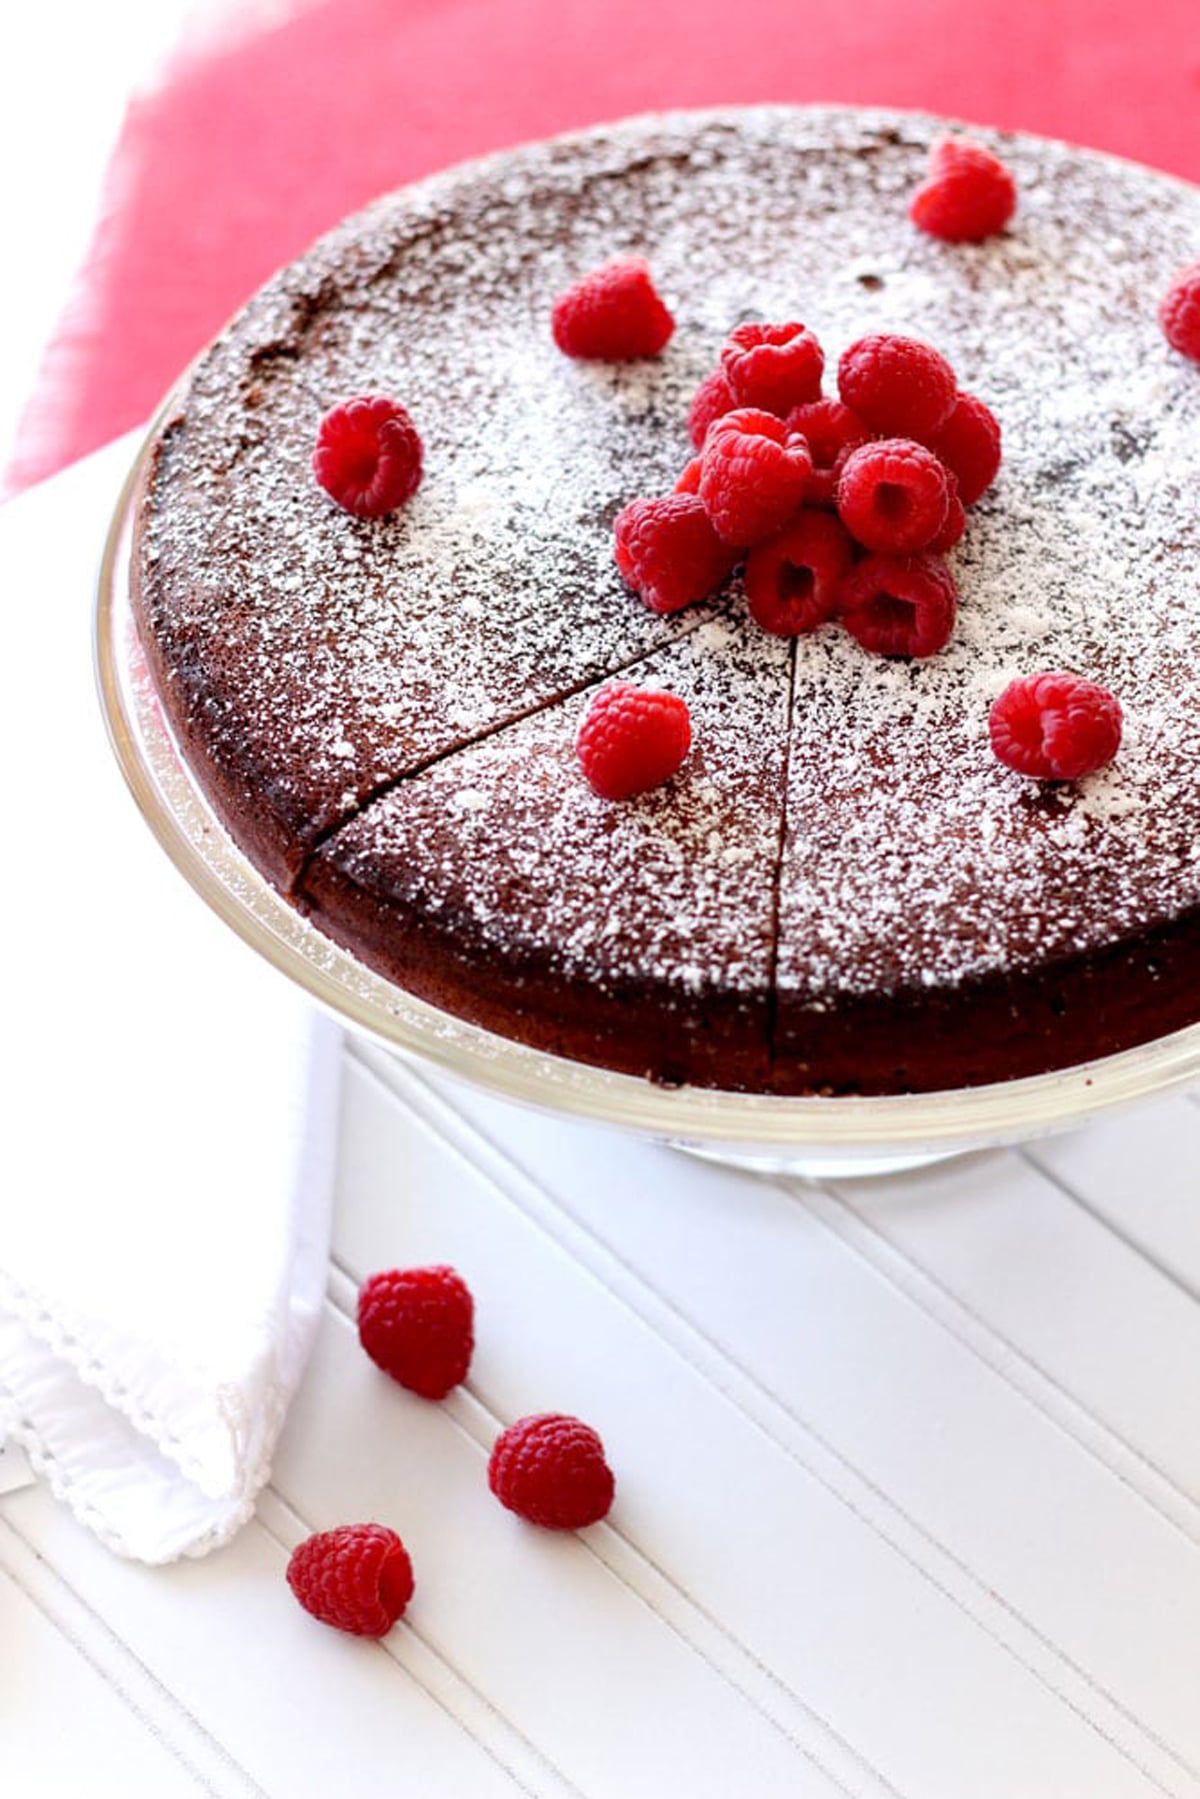 Sliced Flourless Chocolate Torte sitting on a cake dish topped with powdered sugar and fresh raspberries.